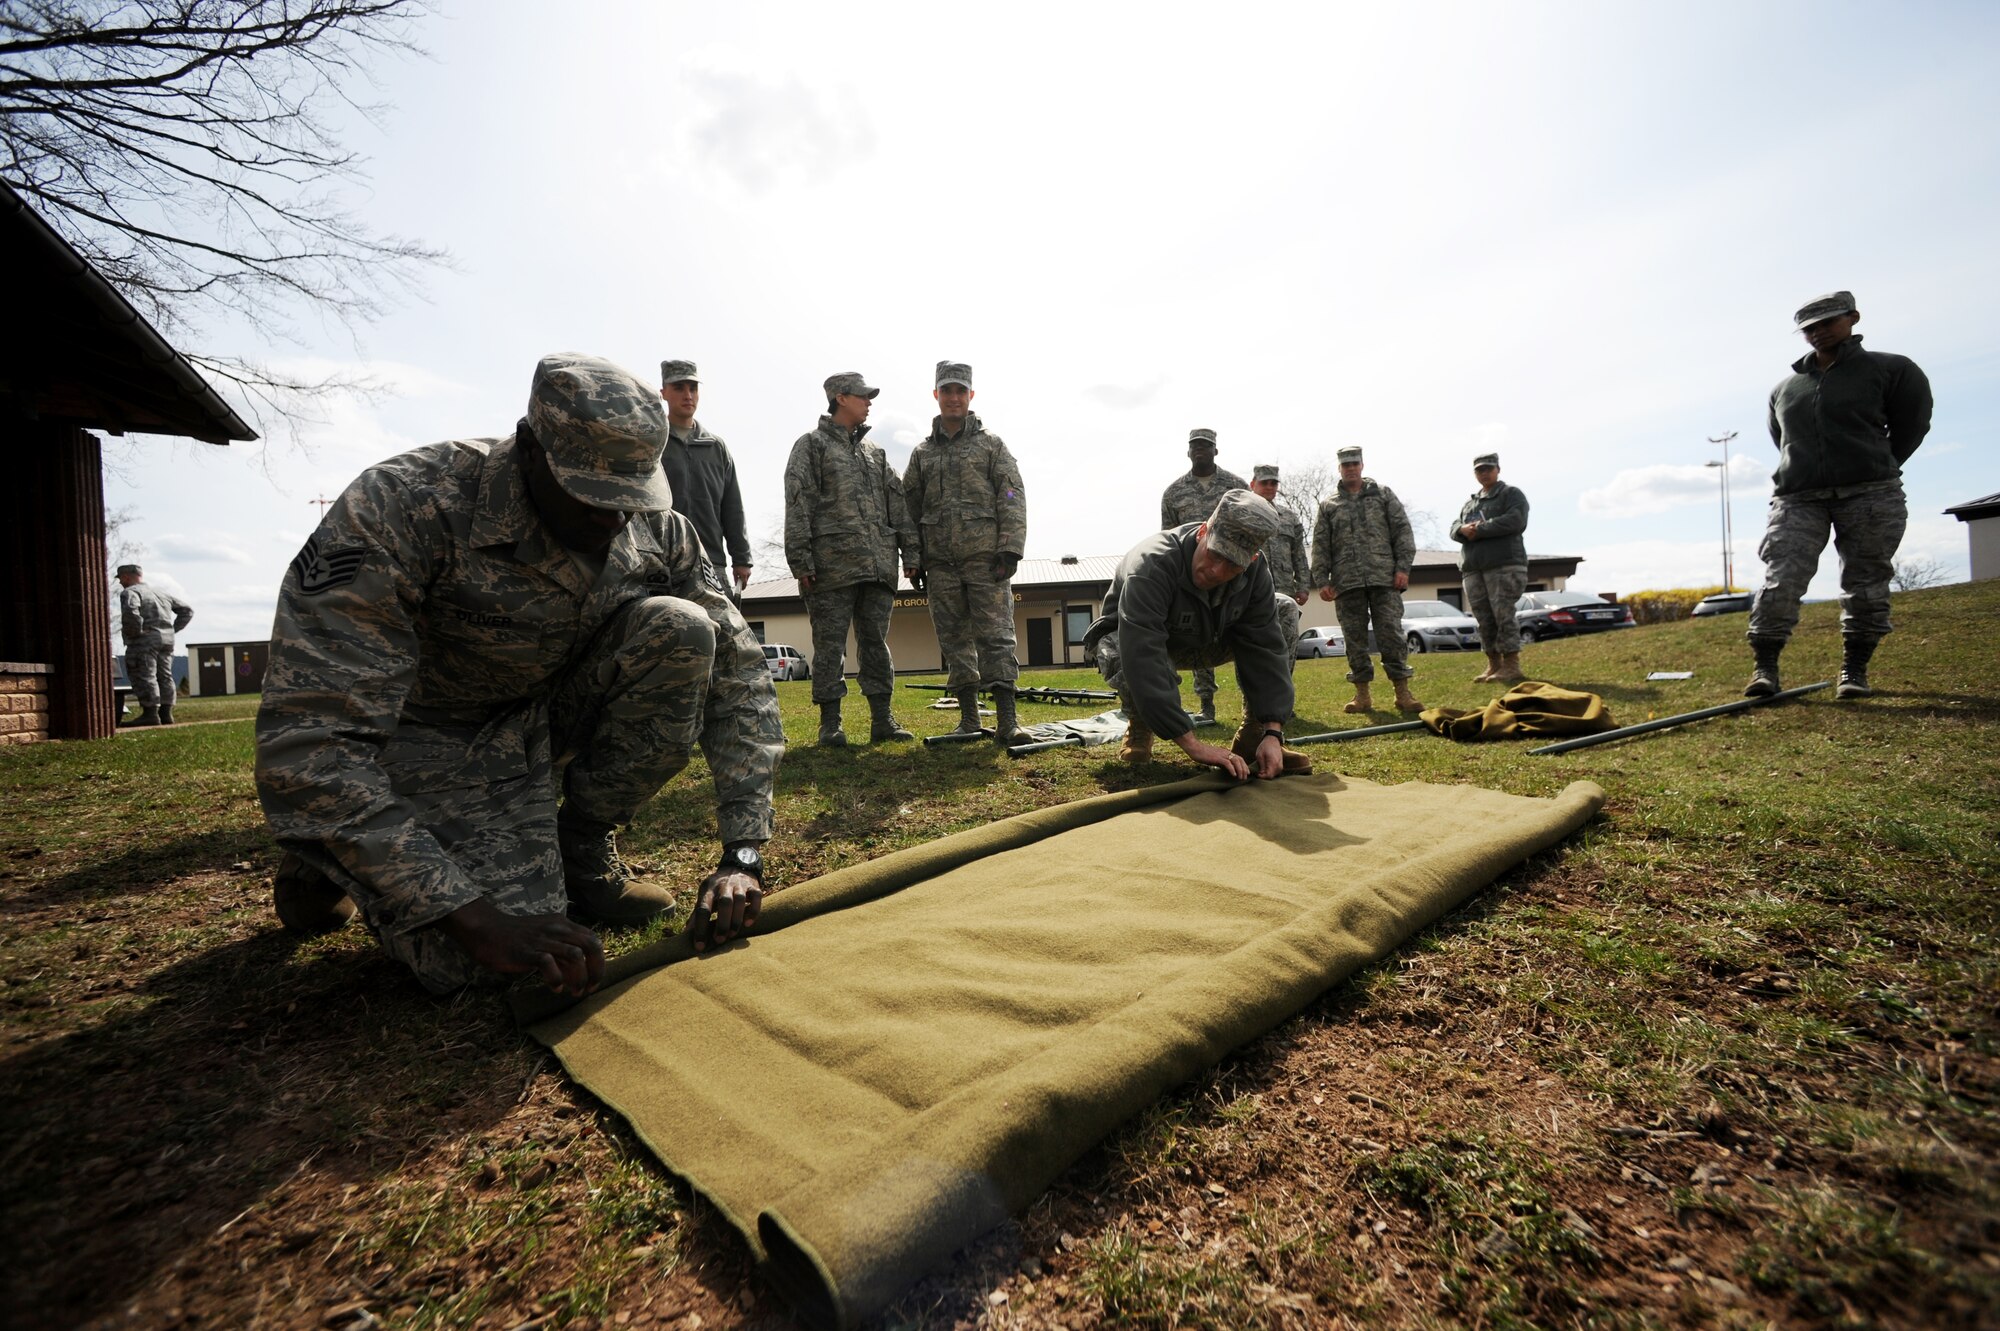 U.S. Air Staff Sgt. Karriem Oliver, 86th Airlift Wing Staff Agency, chaplain's assistant, demonstrates how to make an improvised litter during self aid and buddy care training in support of the upcoming Operations Readiness Inspection (ORI), April 2, 2010, Ramstein Air Base, Germany. Preparation for the ORI allows Air Force members to build on strengths and indentify weaknesses in order to better support future missions. (U.S. Air Force photo by Tech. Sgt. Sarayuth Pinthong)